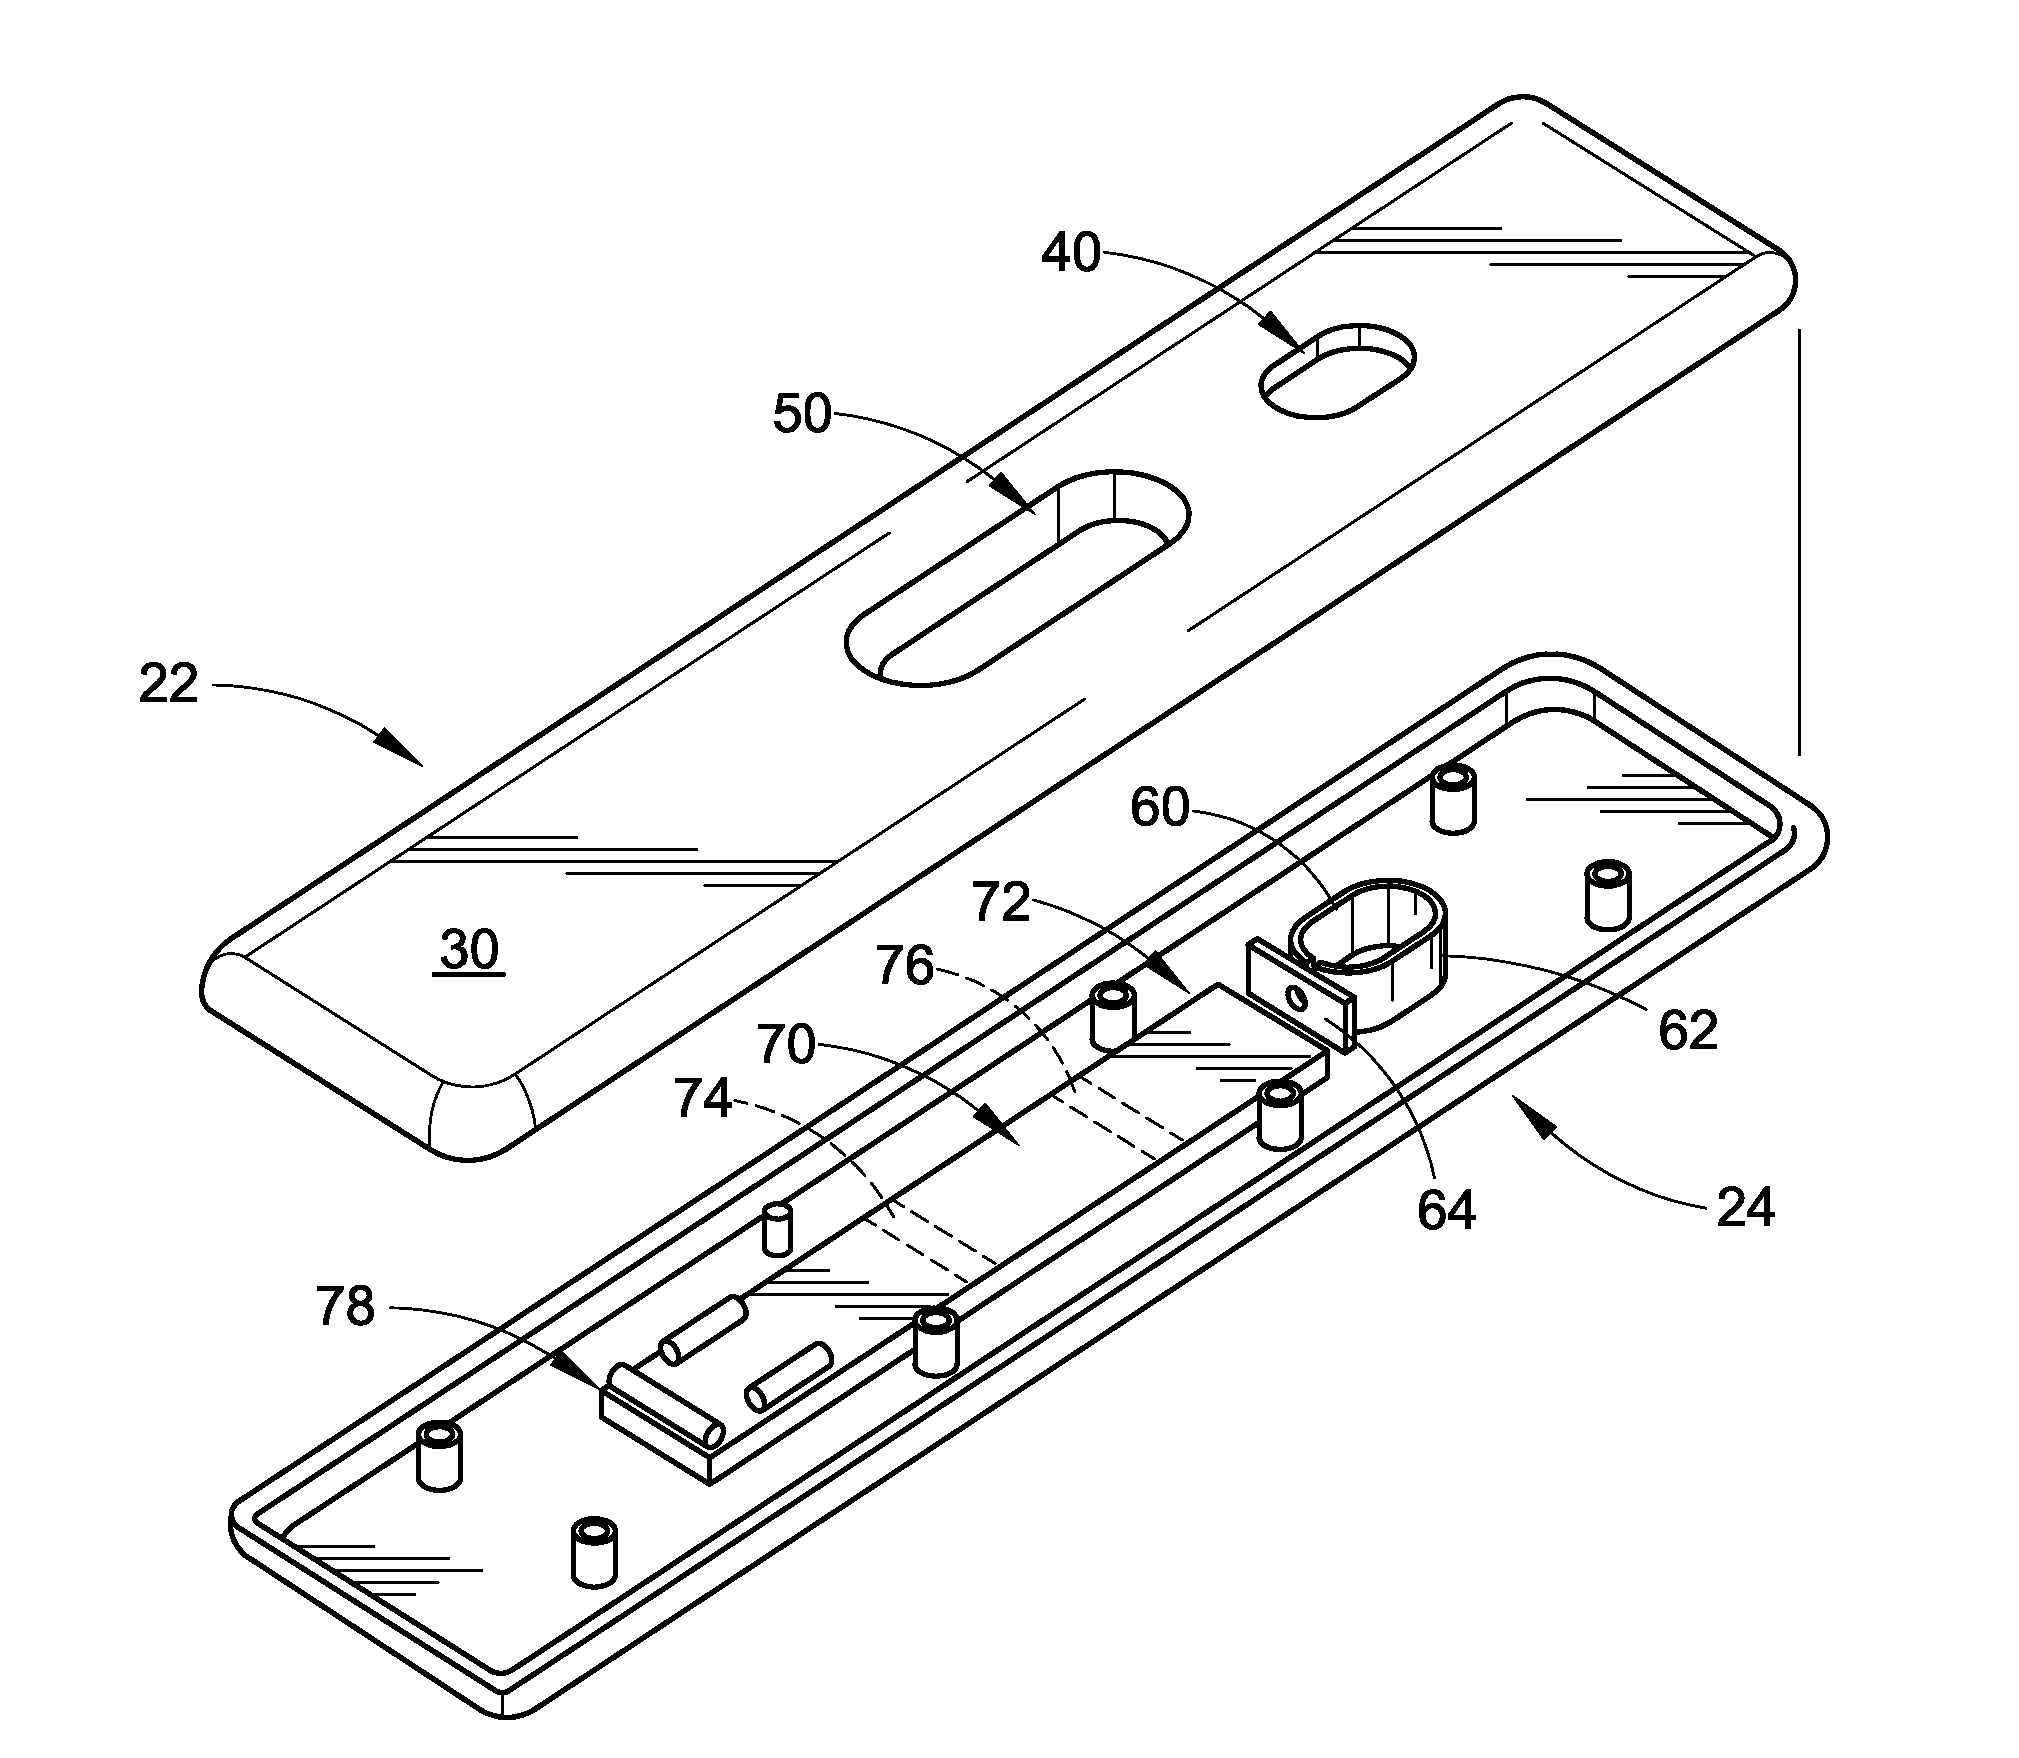 Device for detection of molecules in biological fluids